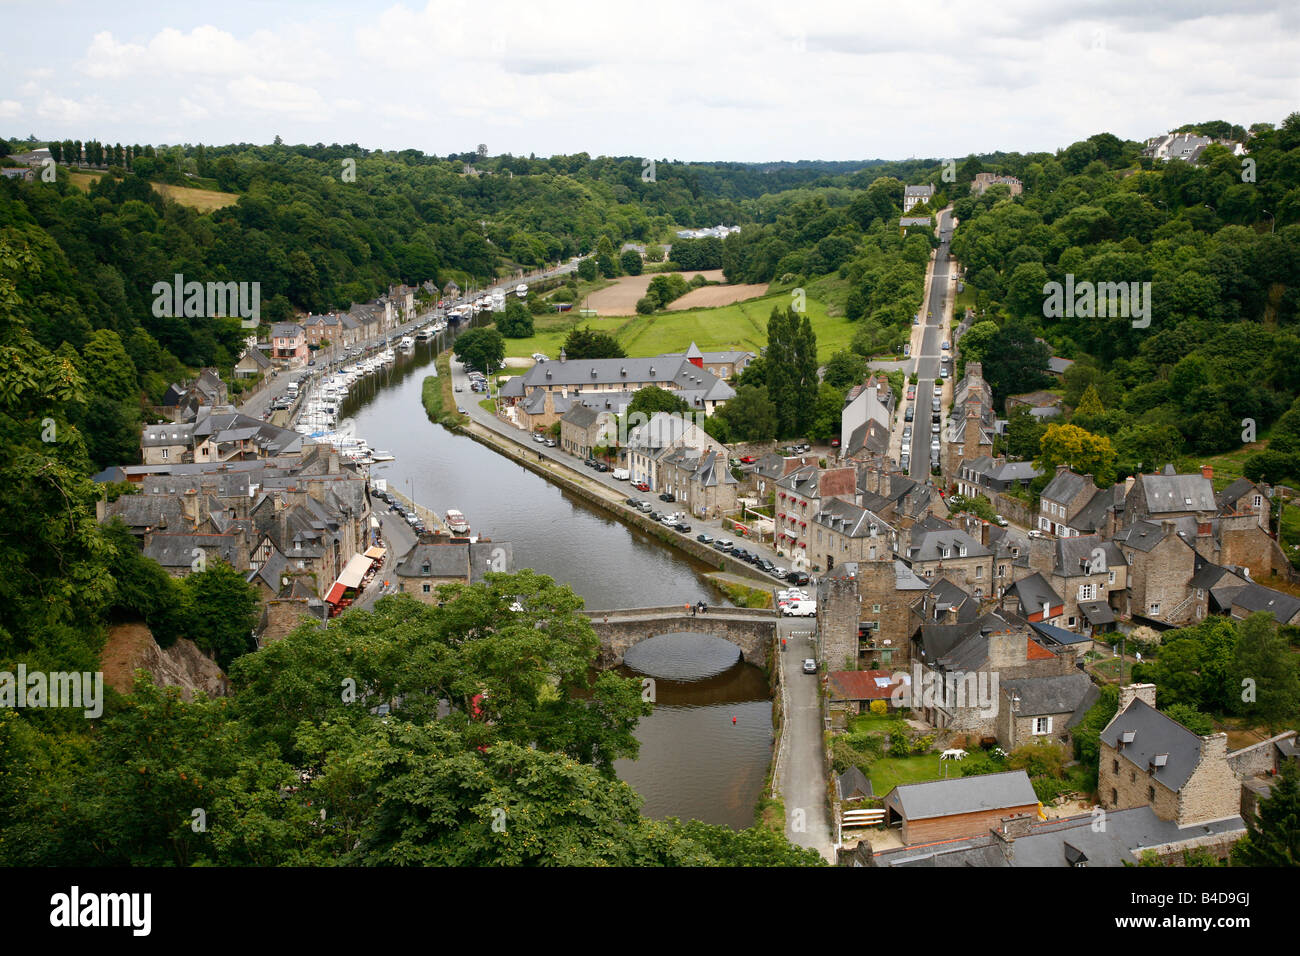 July 2008 - View over La Rance river and the port of Dinan Brittany France Stock Photo